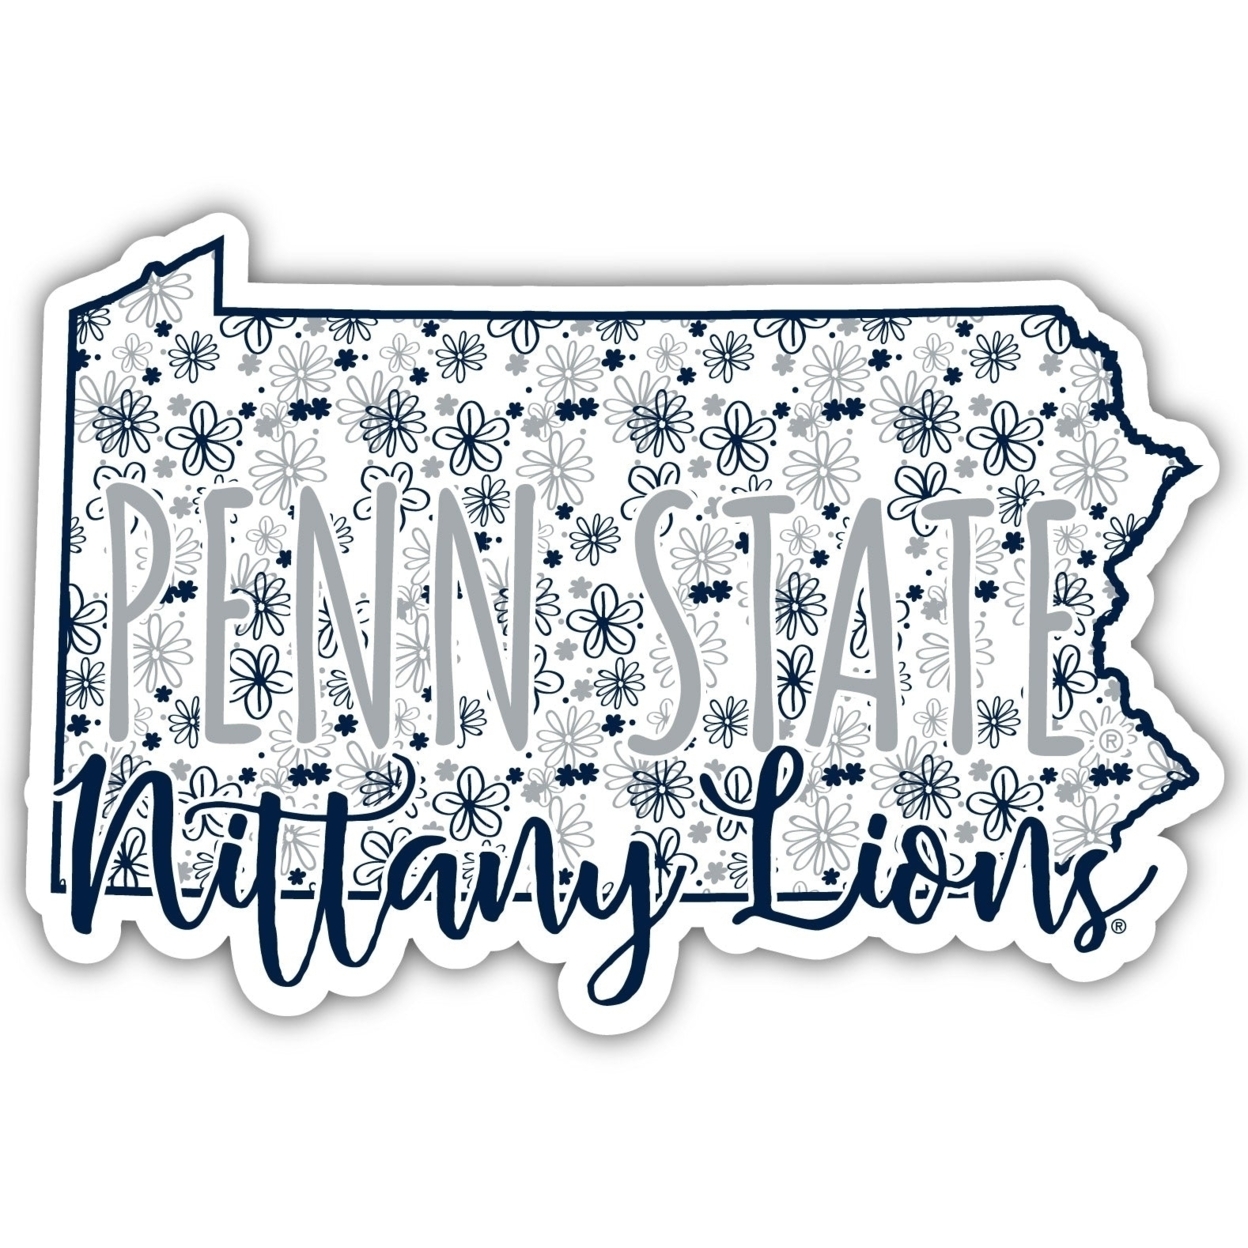 Penn State Nittany Lions Floral State Die Cut Decal 4-Inch